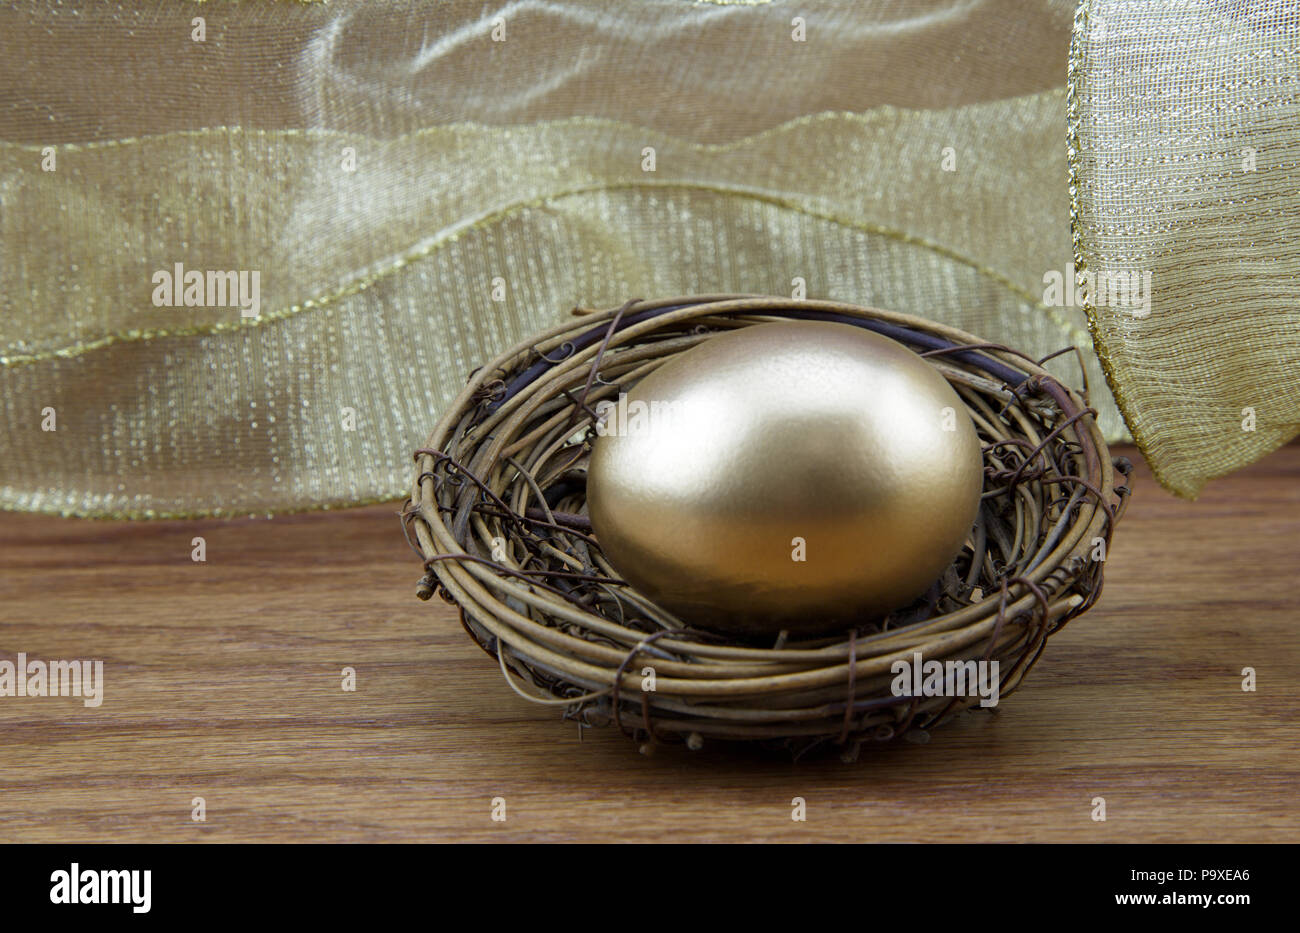 Secure nest egg concept reflected in gold tones and wood grain background Stock Photo